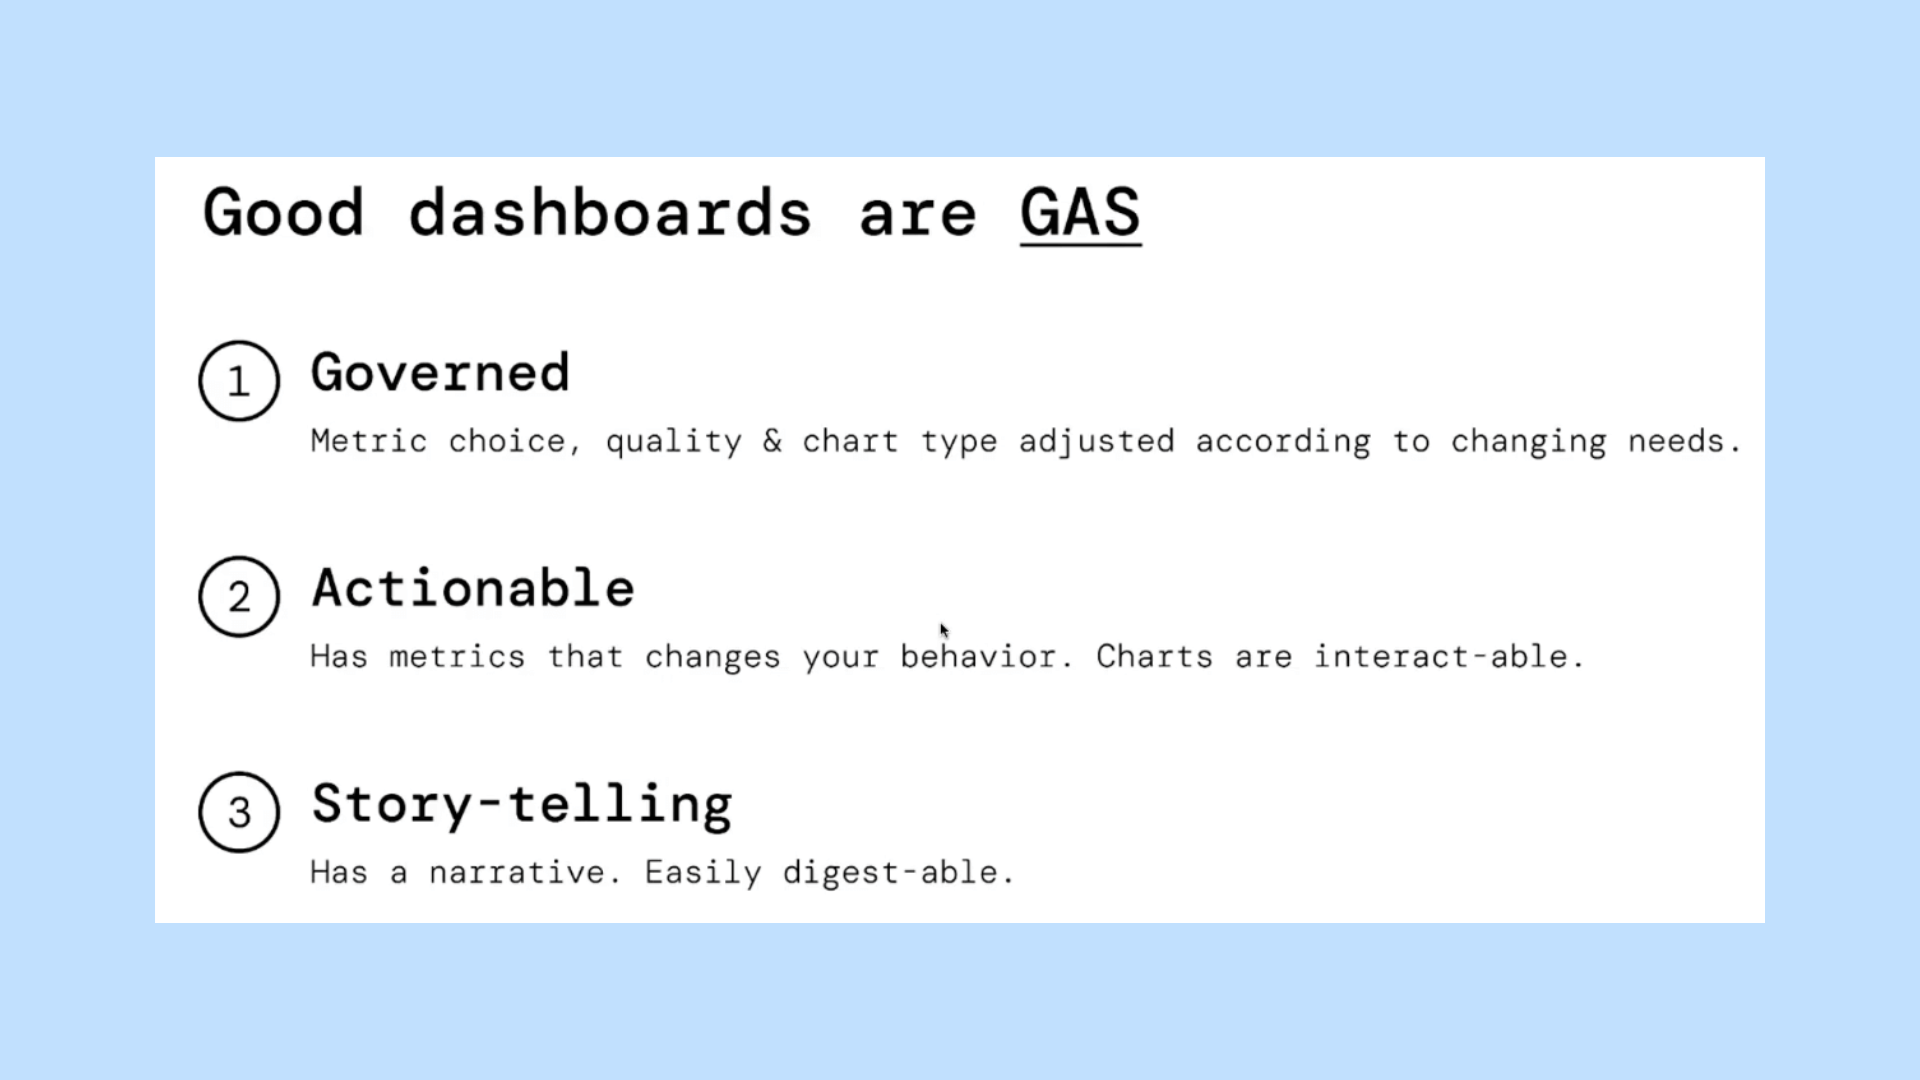 Good dashboards are GAS